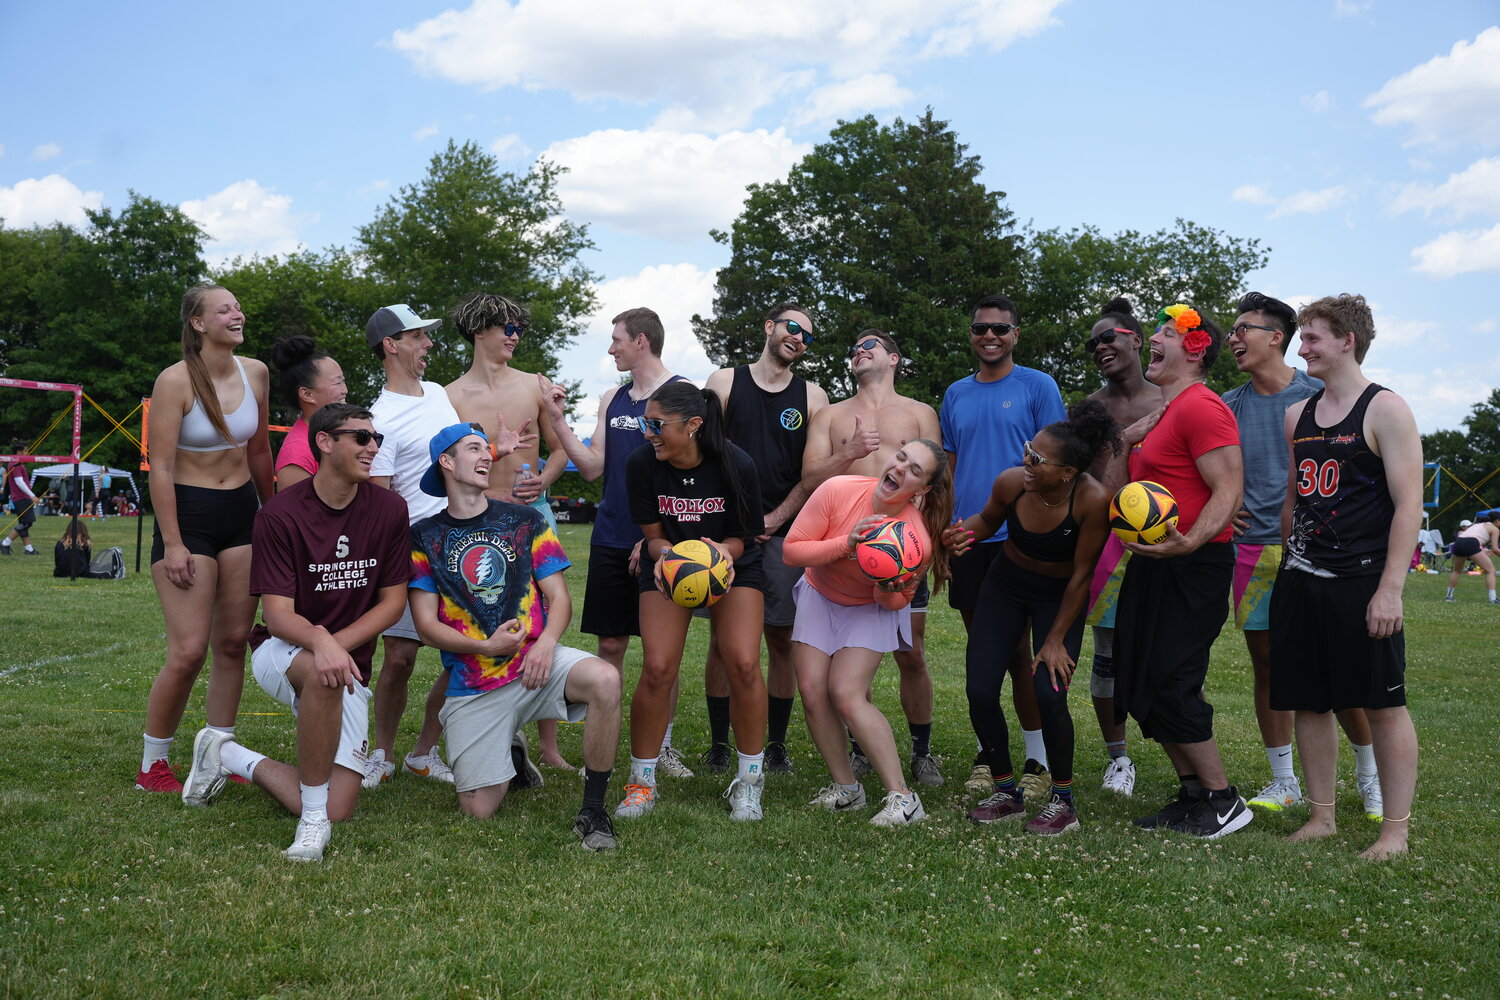 The second annual PrideFest volleyball tournament took place in Eisenhower Park on June 10. The event raised nearly $6,000 for PFY and the LGTBQ community.